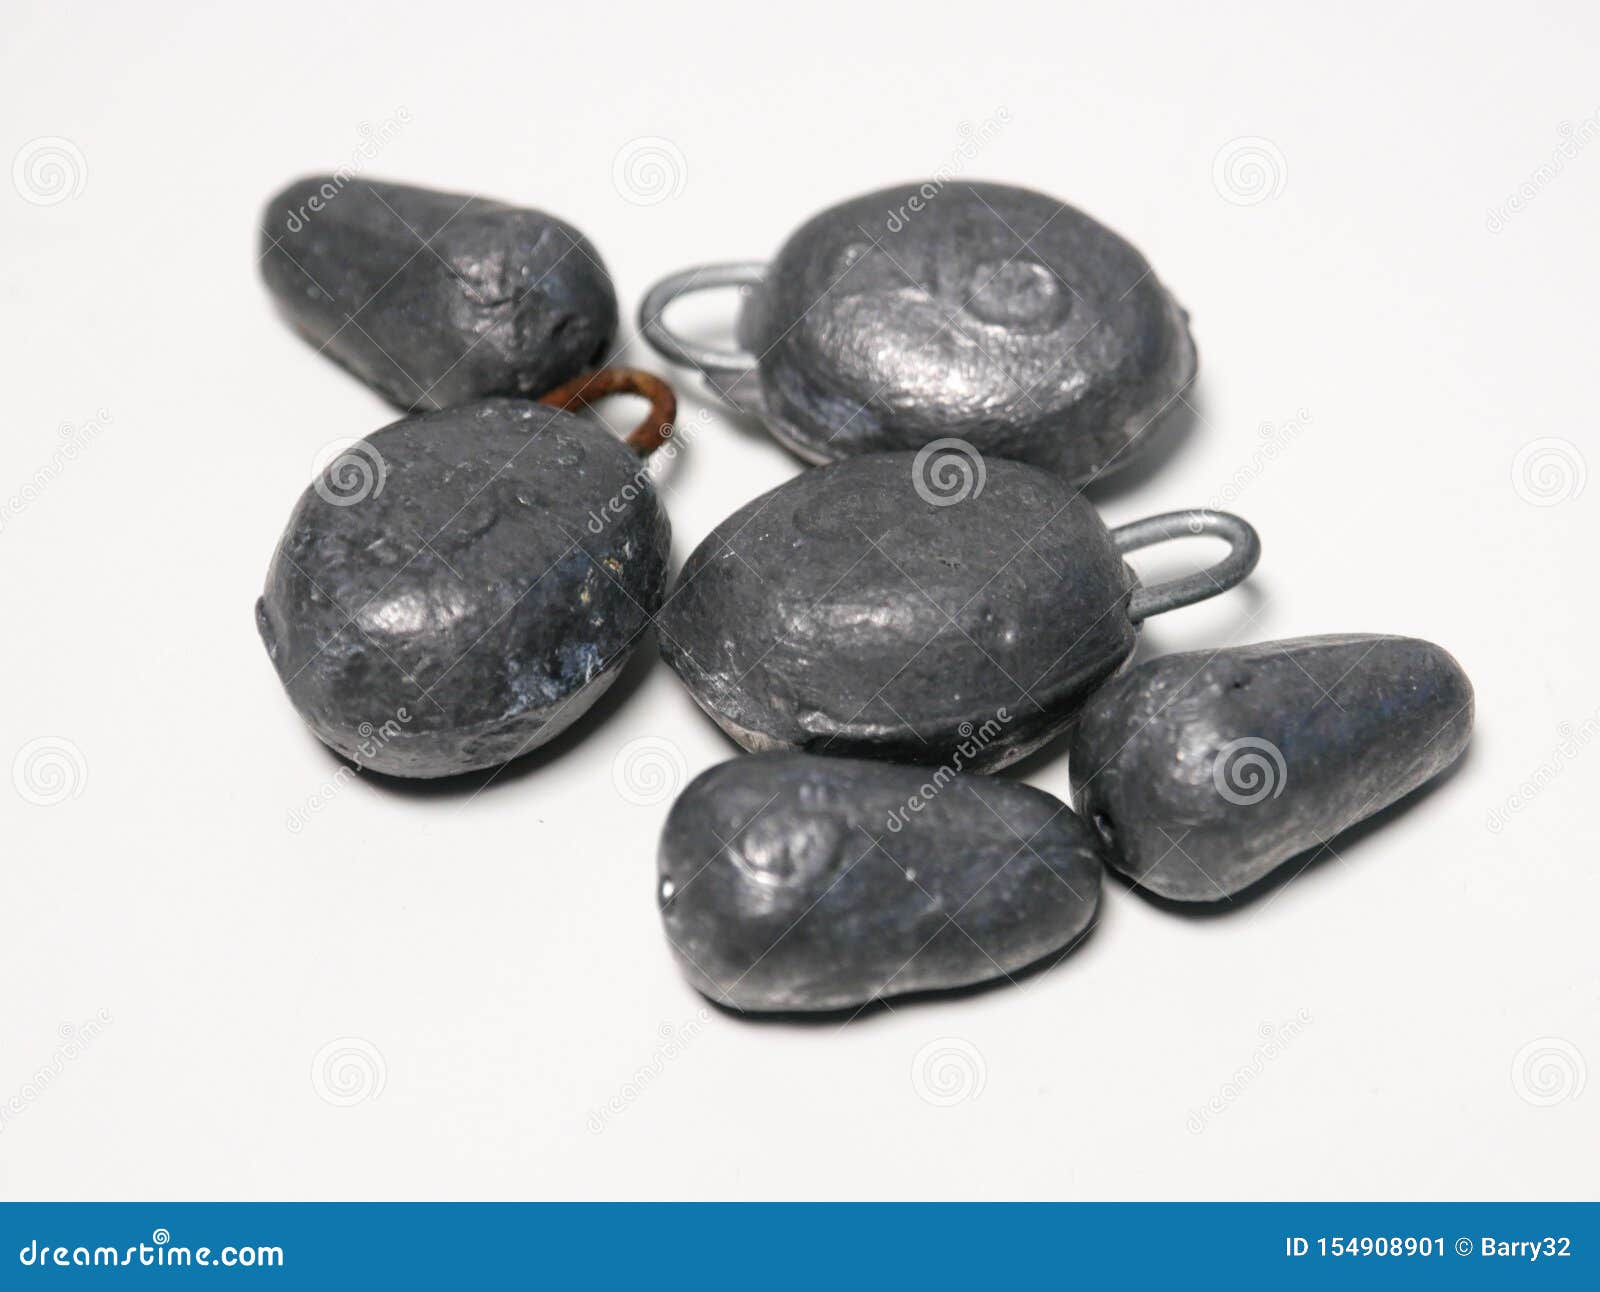 Lead Weights Used for Fishing. Stock Image - Image of metal